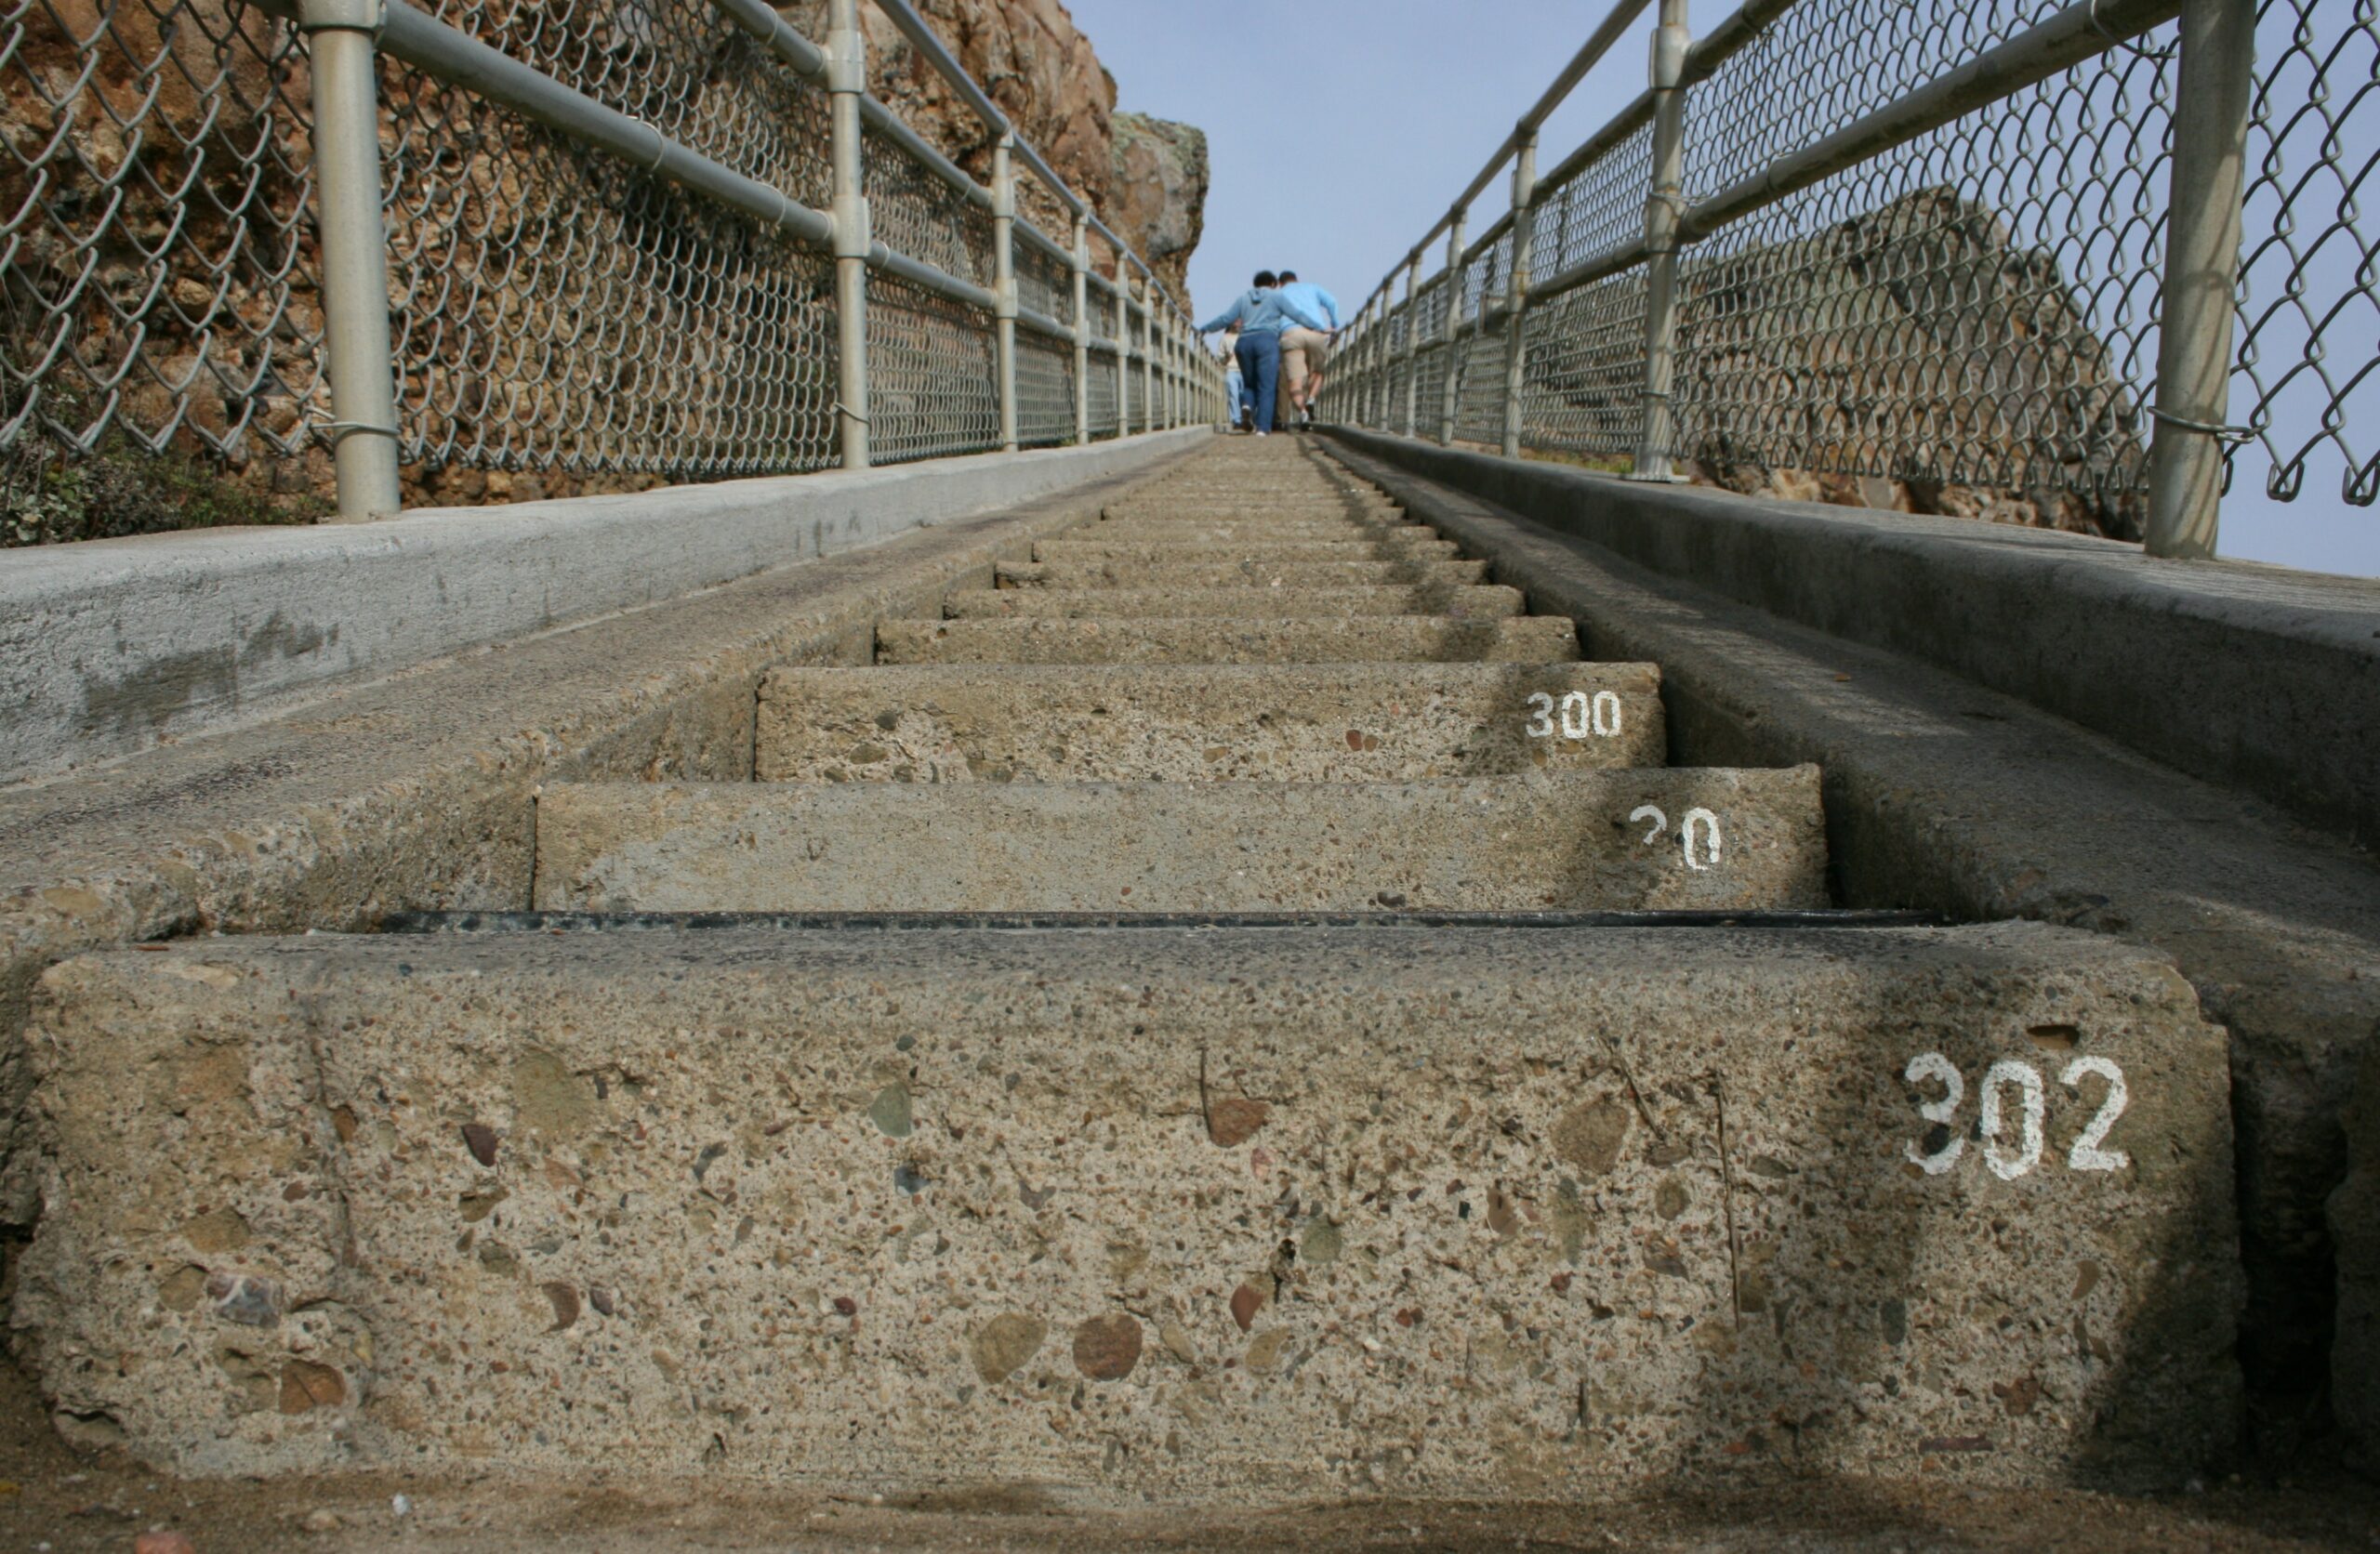 Visiting the Point Reyes Lighthouse requires visitors to walk down and up 302 stairs.